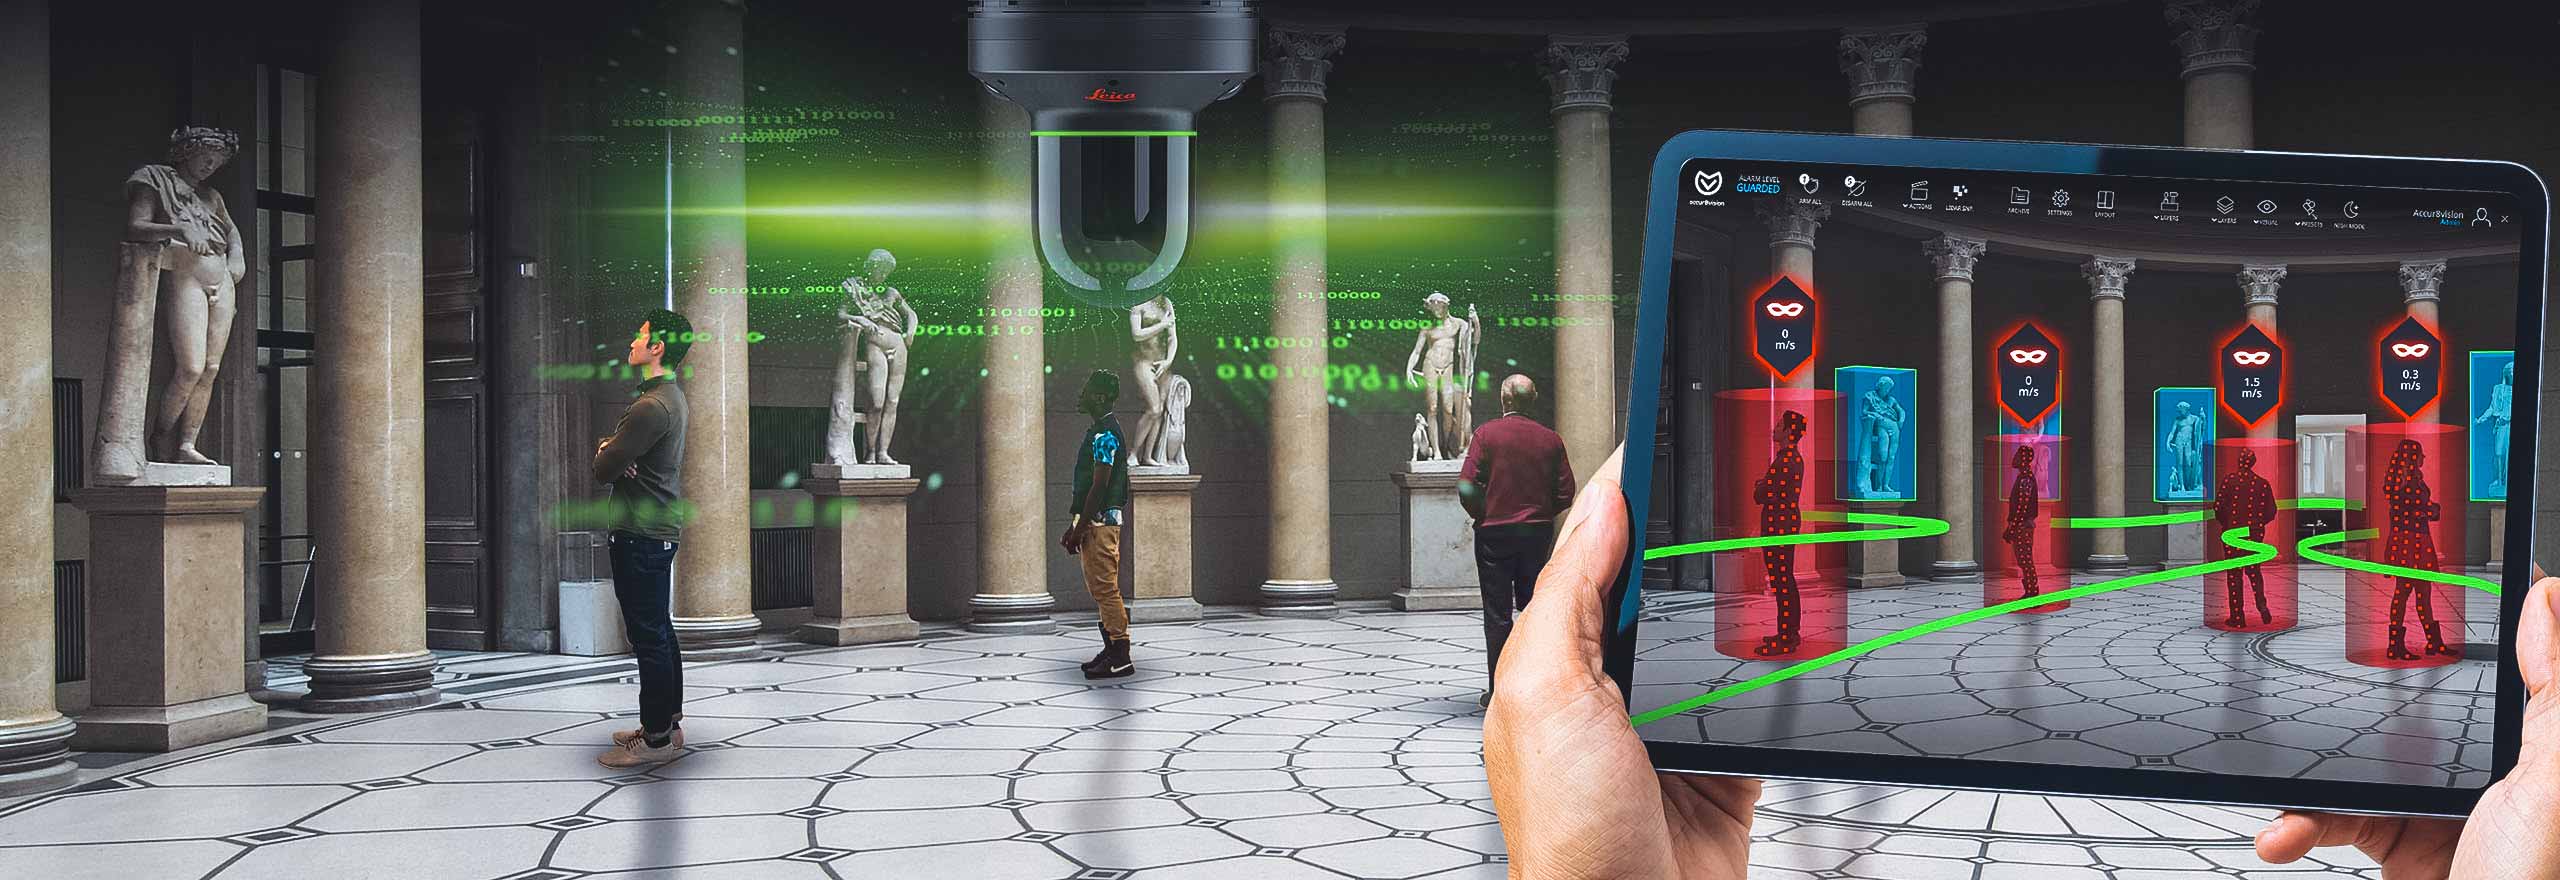 Museum using 3D security solution Leica BLK247 with tablet showing Accur8vision volumetric surveillance software. 